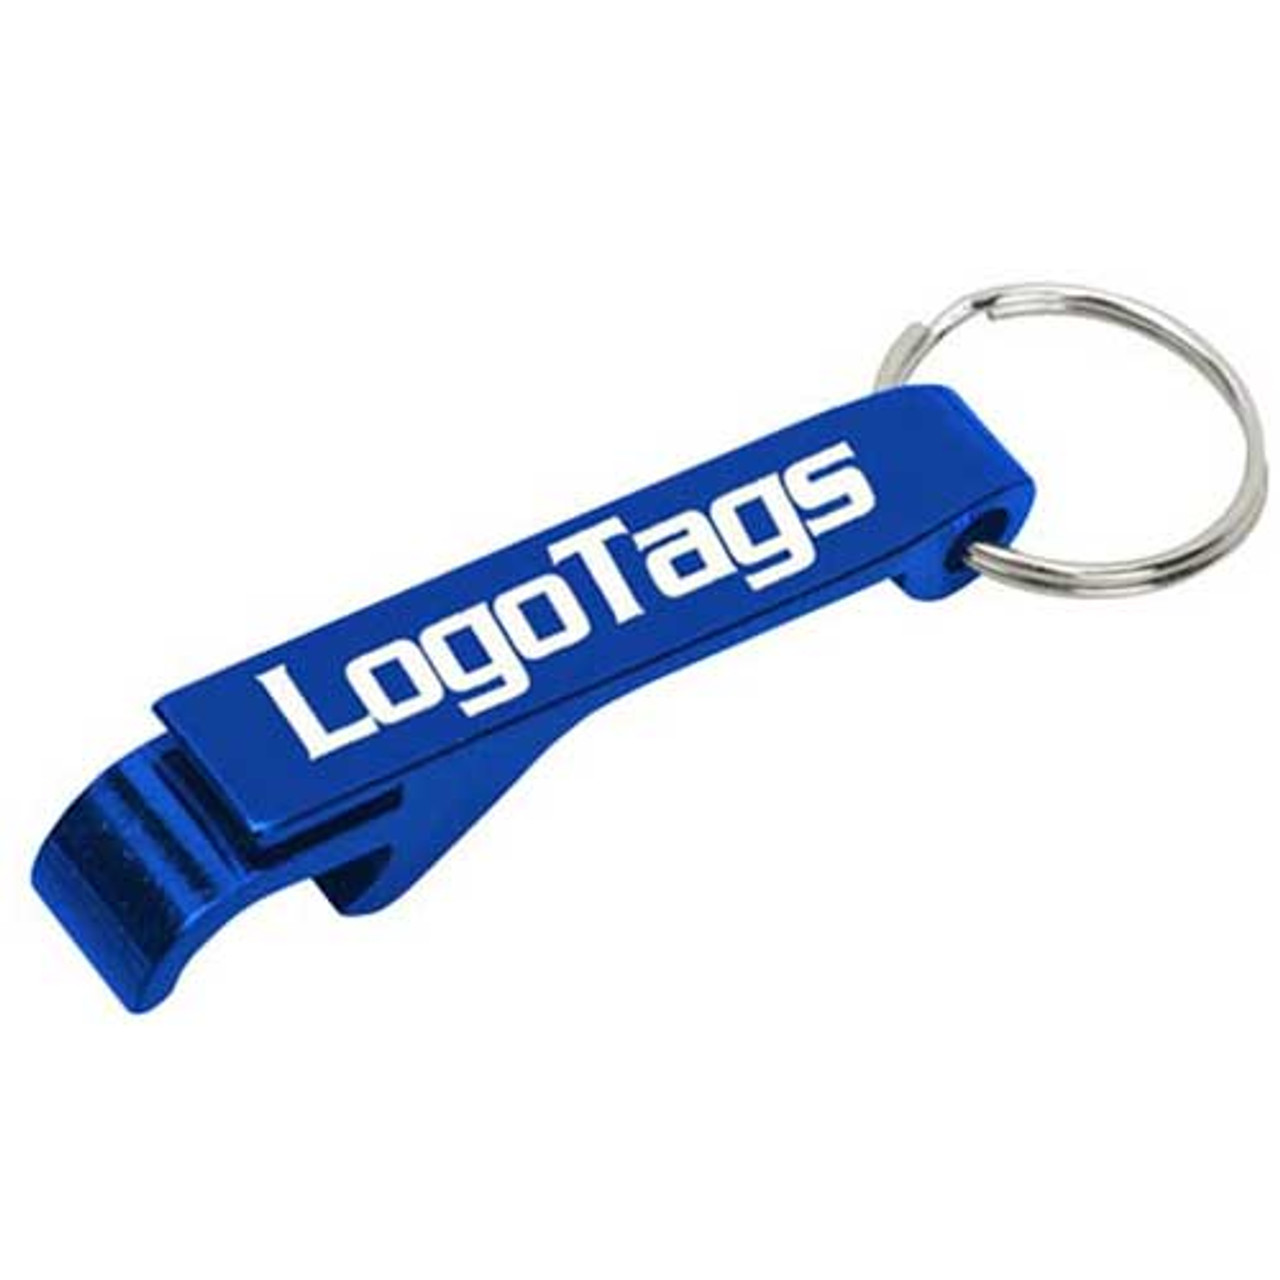 https://cdn11.bigcommerce.com/s-xodj2hveic/images/stencil/1280x1280/products/138/1055/Custom-LogoTags-Engraved-Keychain-Bottle-Opener-Wrench-STyle-Blue__20539.1518542758.jpg?c=2